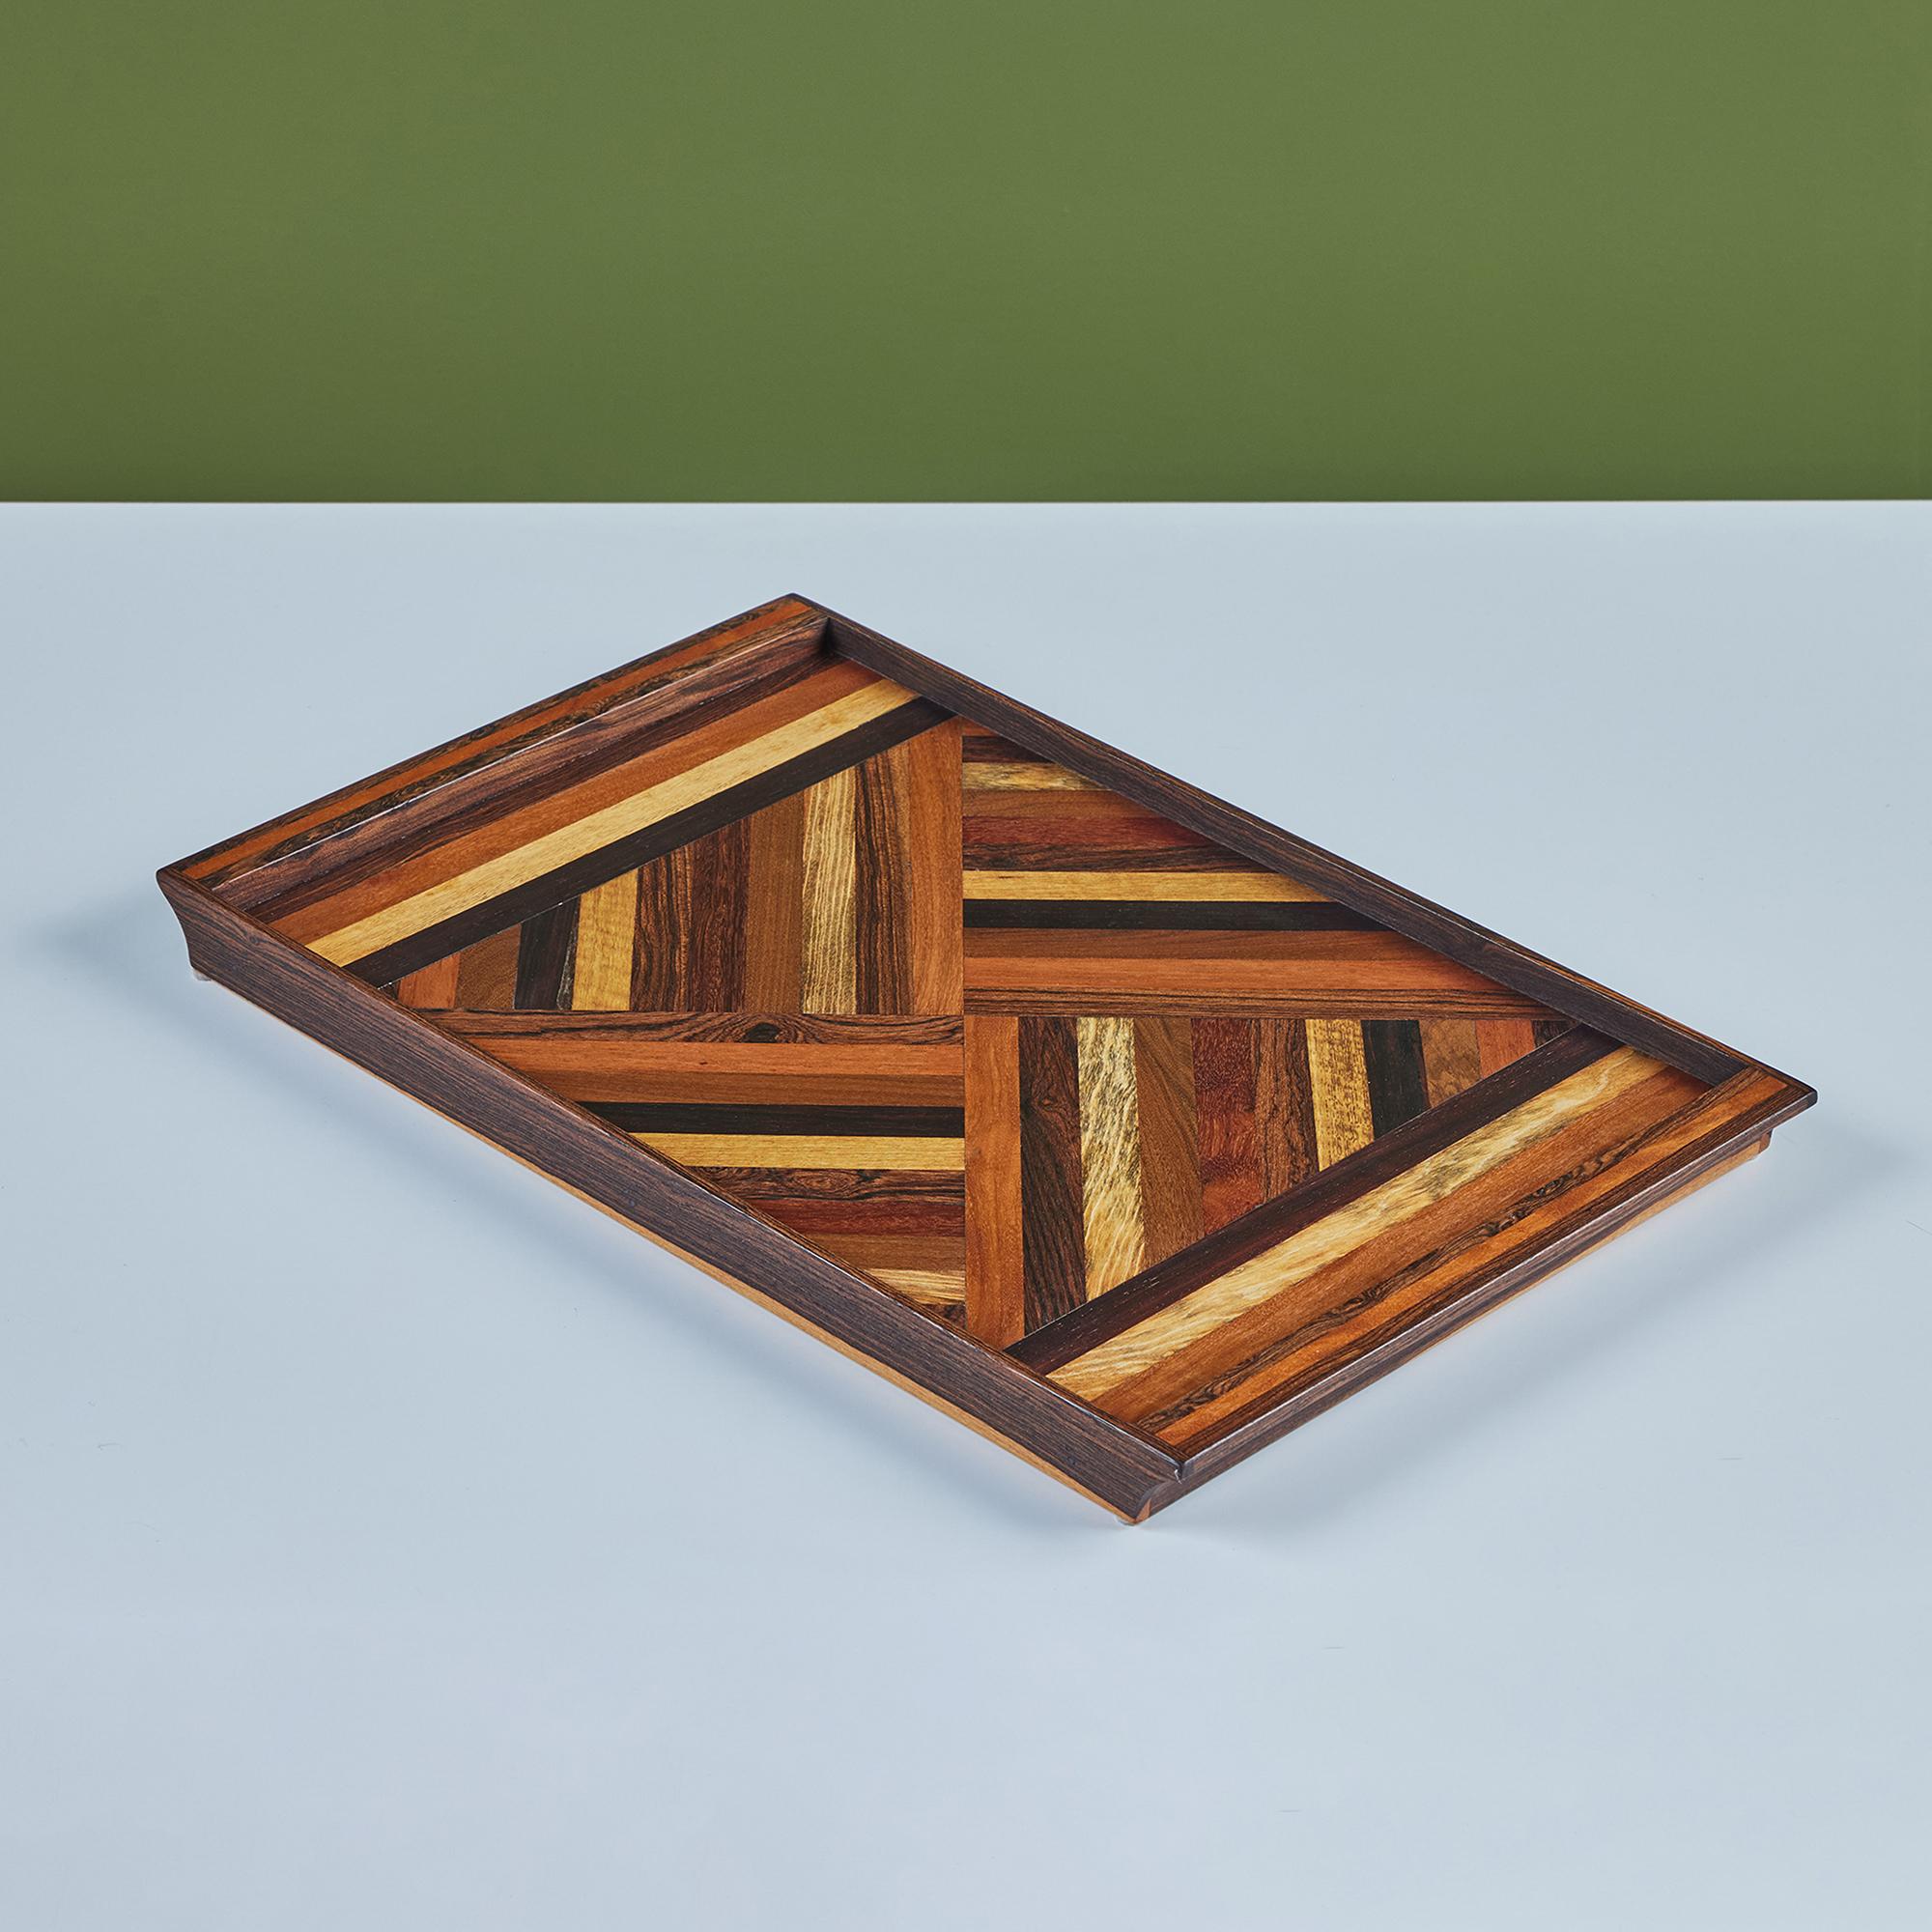 A rosewood serving tray by Don Shoemaker for his company Señal in the 1960s. The surface of the tray has a repeating geometric marquetry pattern in a gradient of local Mexican hardwoods. The rectangular tray has four sides and two handles.

CITES